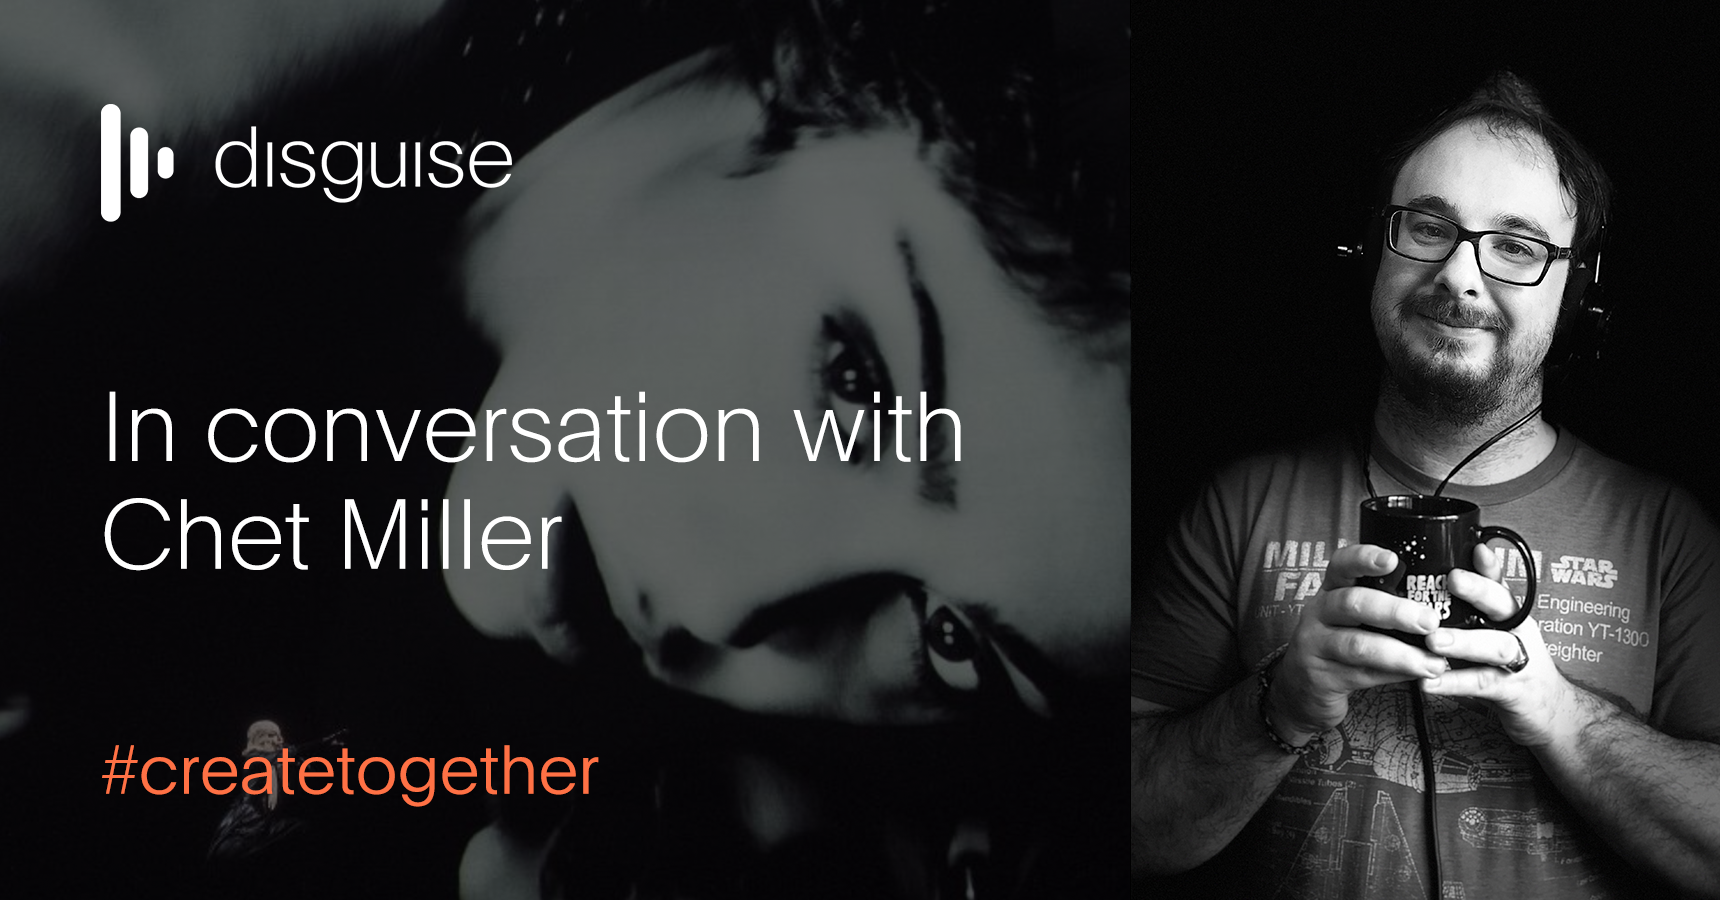 In conversation with Chet Miller